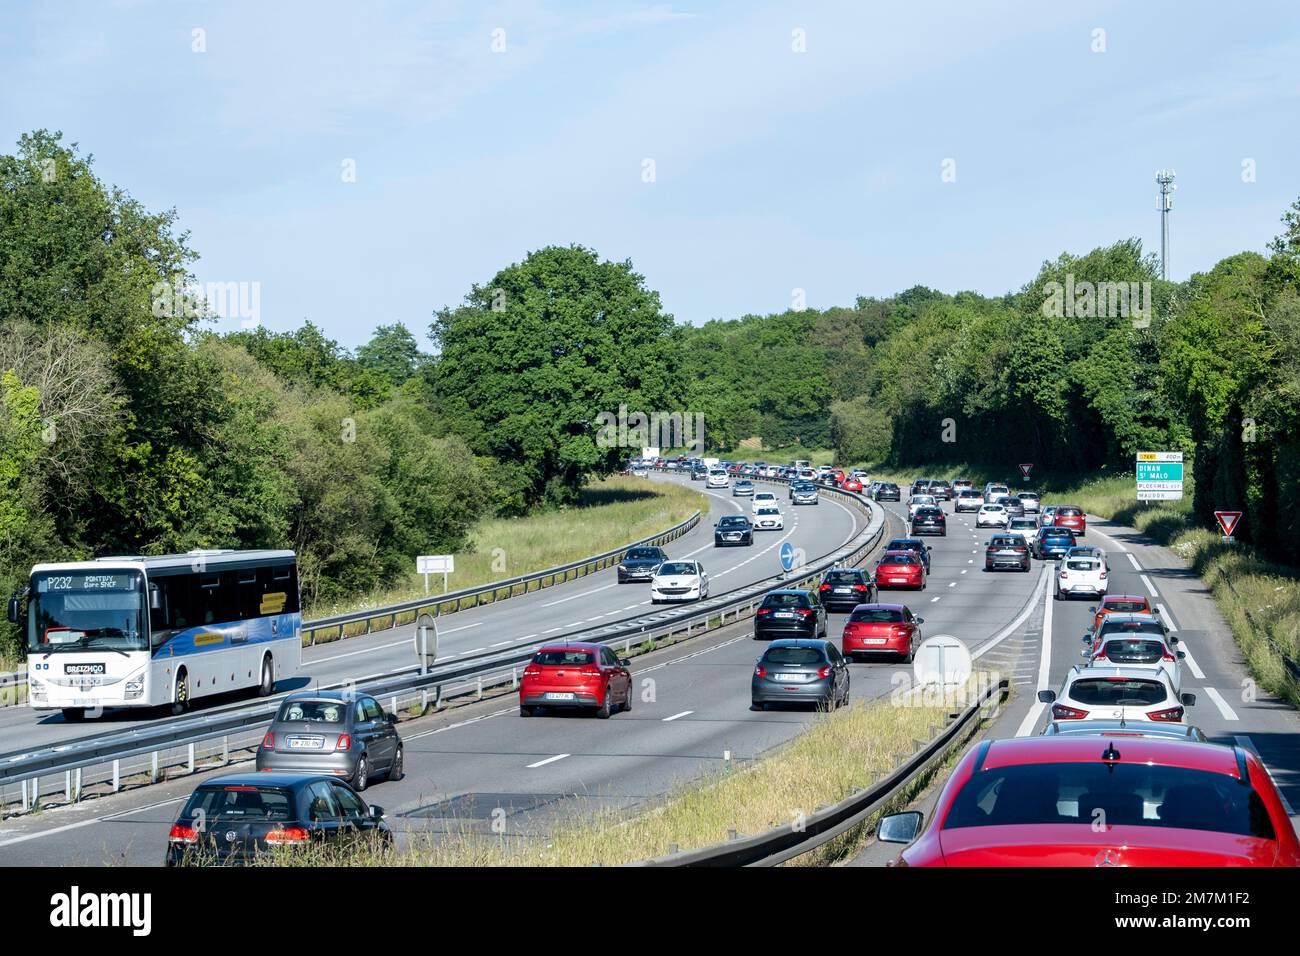 Heavy road traffic after the long Ascension weekend in the surroundings of the interchange between the N166 and N24 A roads in Ploermel Breizhgo coach Stock Photo